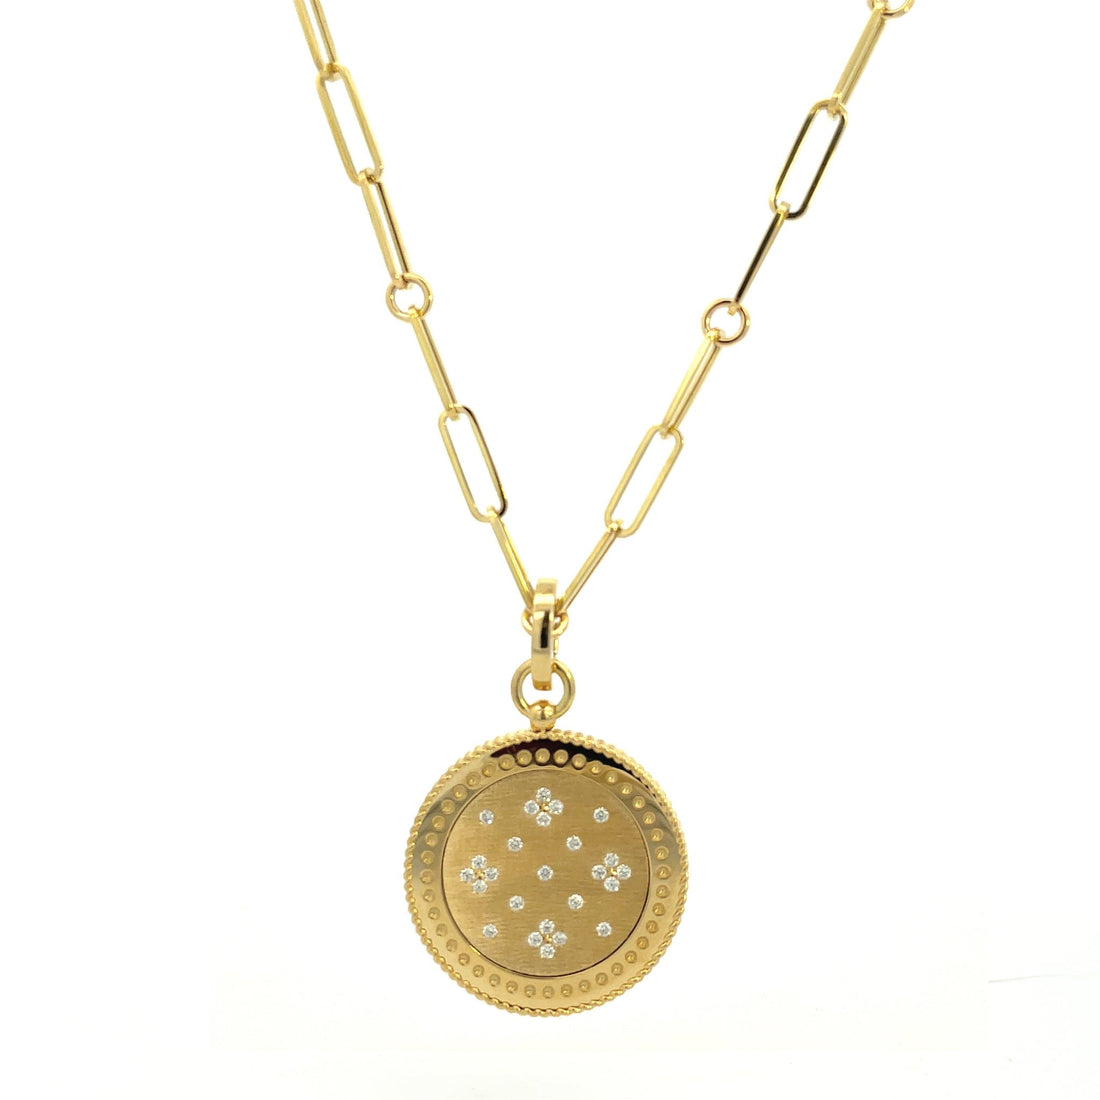 Yellow Gold Venetian Princess Medallion Pendant by Roberto Coin - Skeie's Jewelers